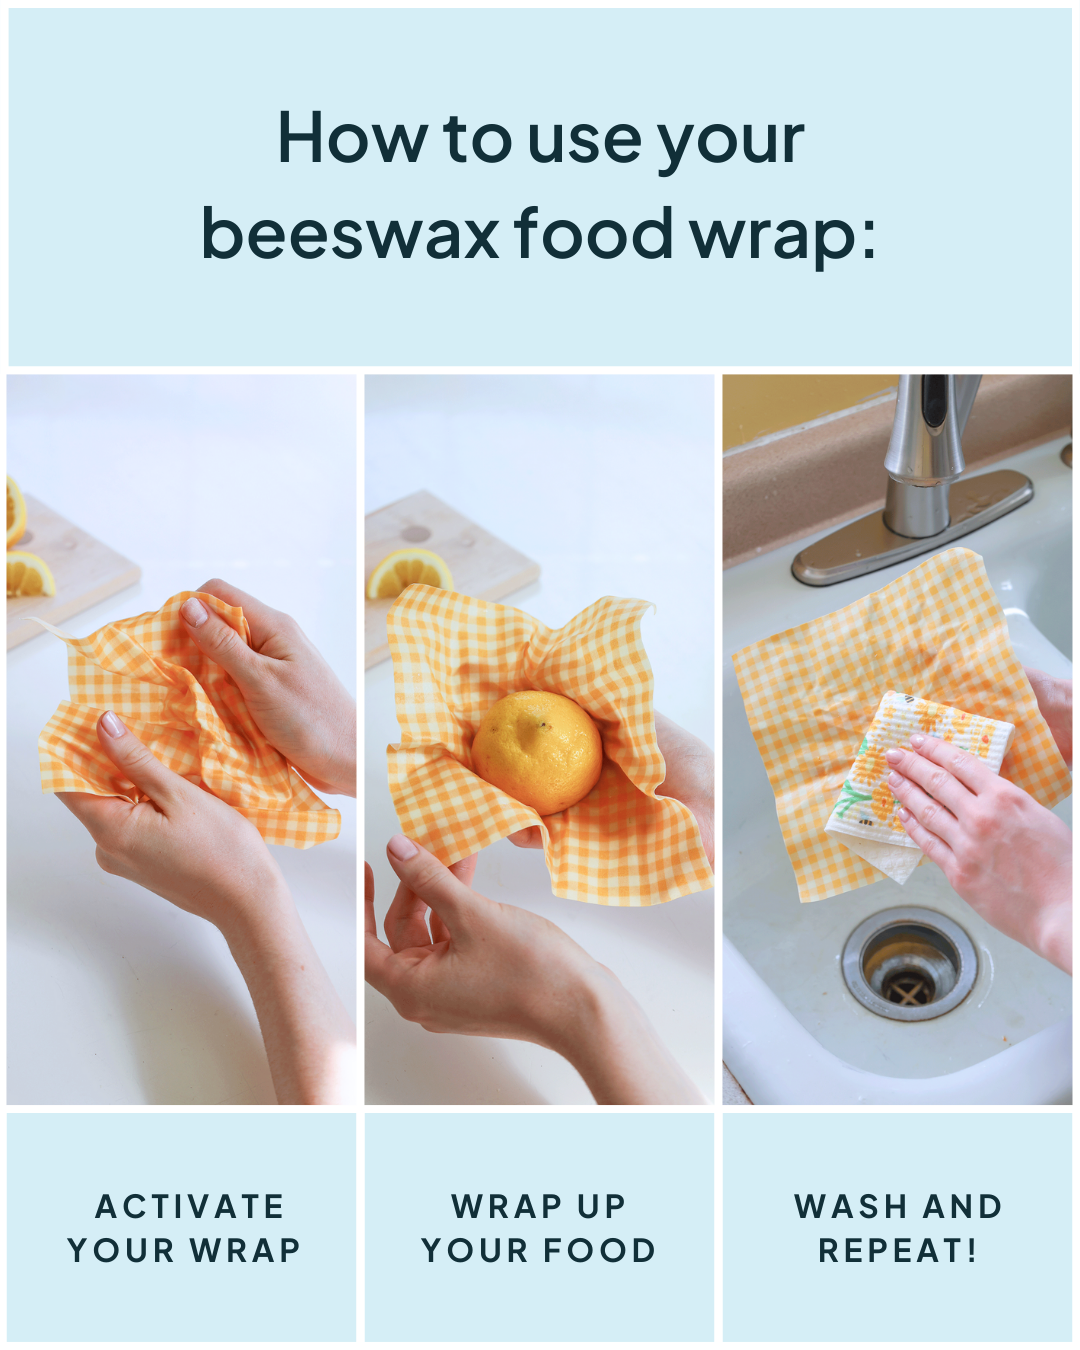 Beeswax Wrap Variety Set 4 Pack Bundle | Nature Bee